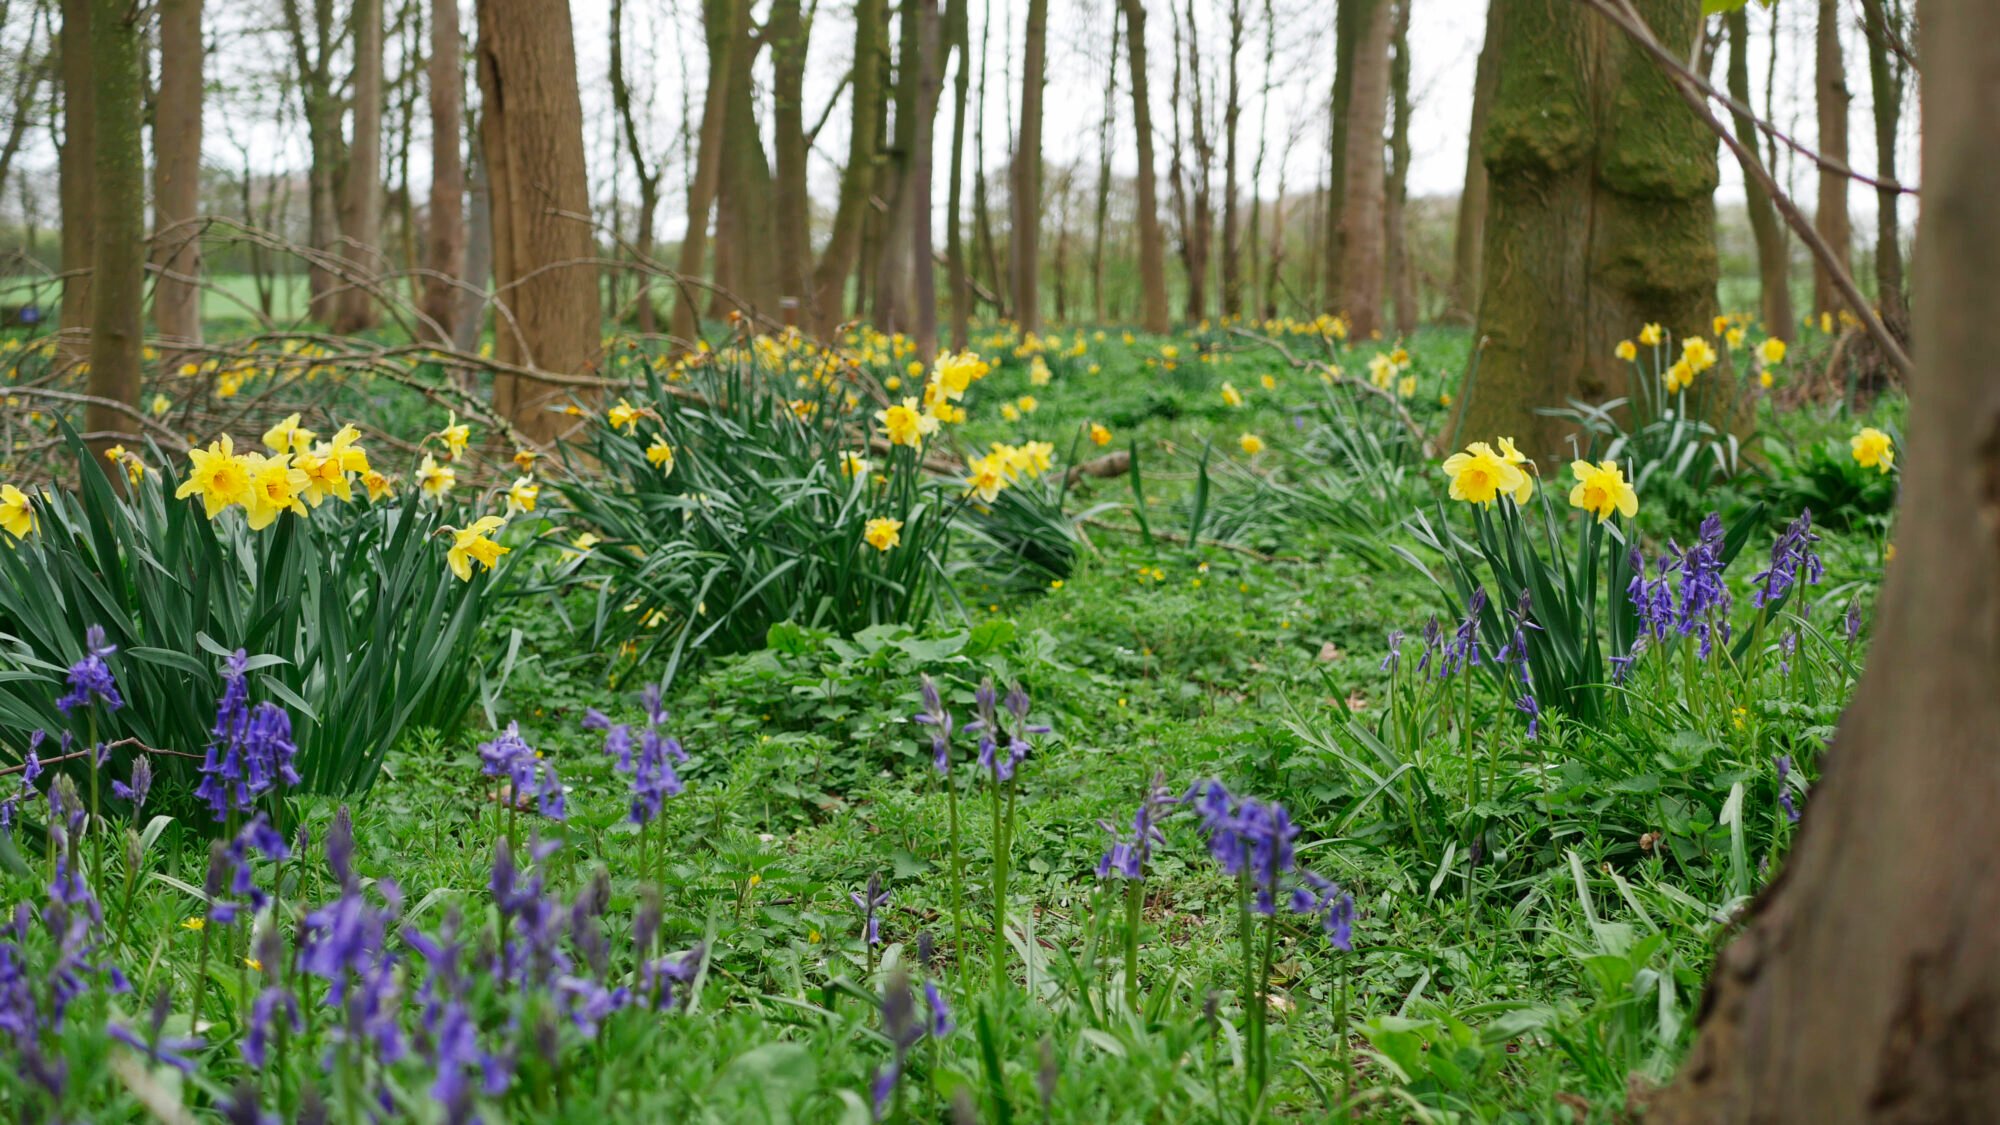 Image name daffodils at burton constable arboretum near hull the 13 image from the post Our List Of The Best Things To Do In Hull With Kids in Yorkshire.com.